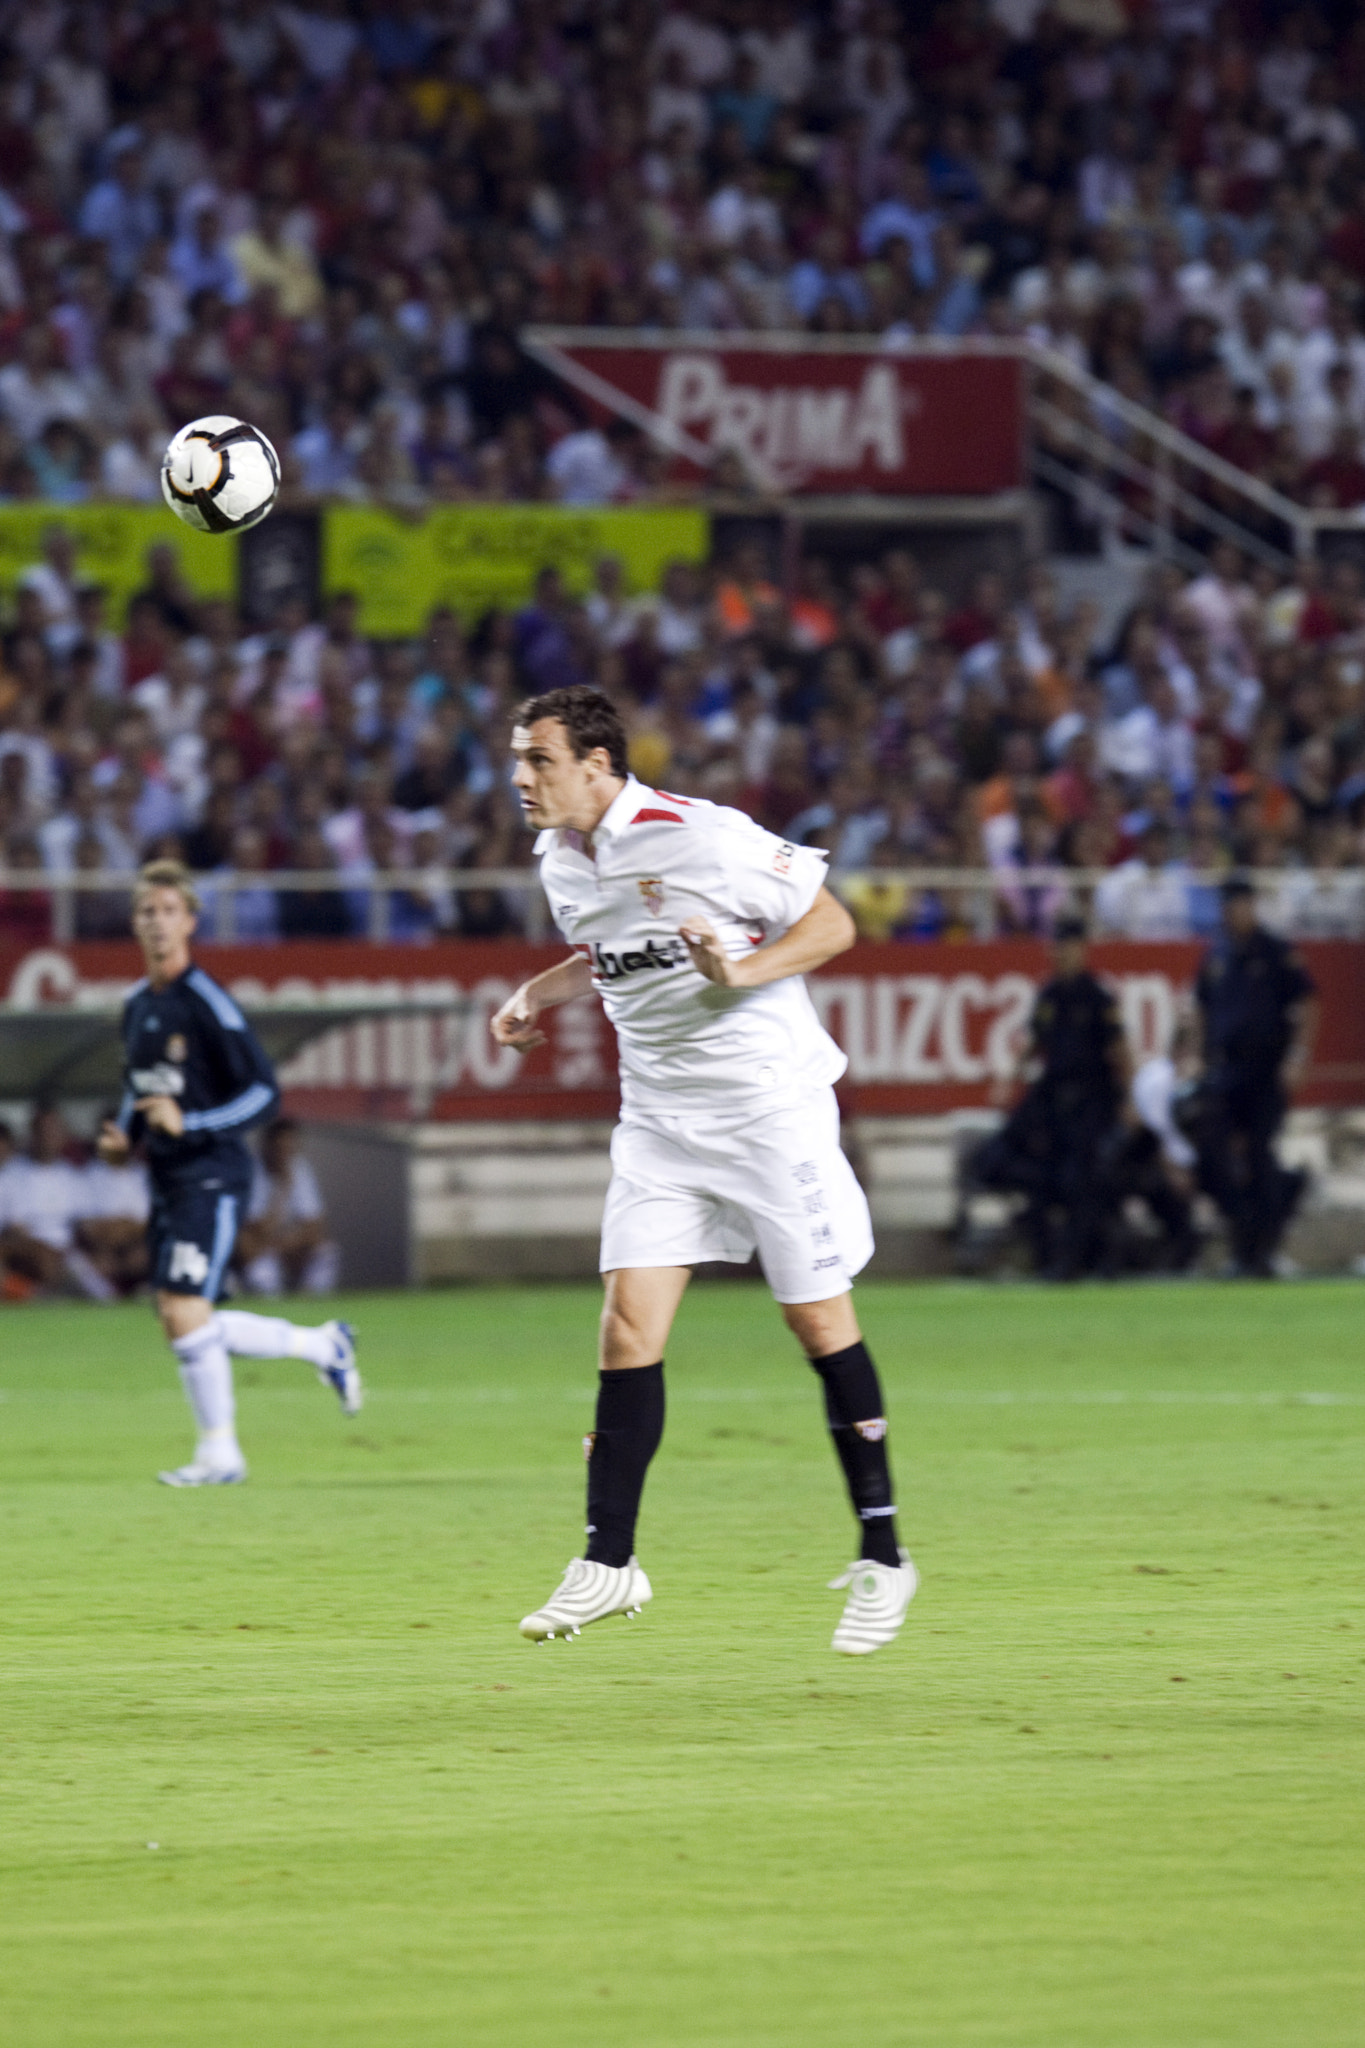 Sebastien Squillaci heading the ball. Spanish League game between Sevilla FC and Real Madrid, Sanche